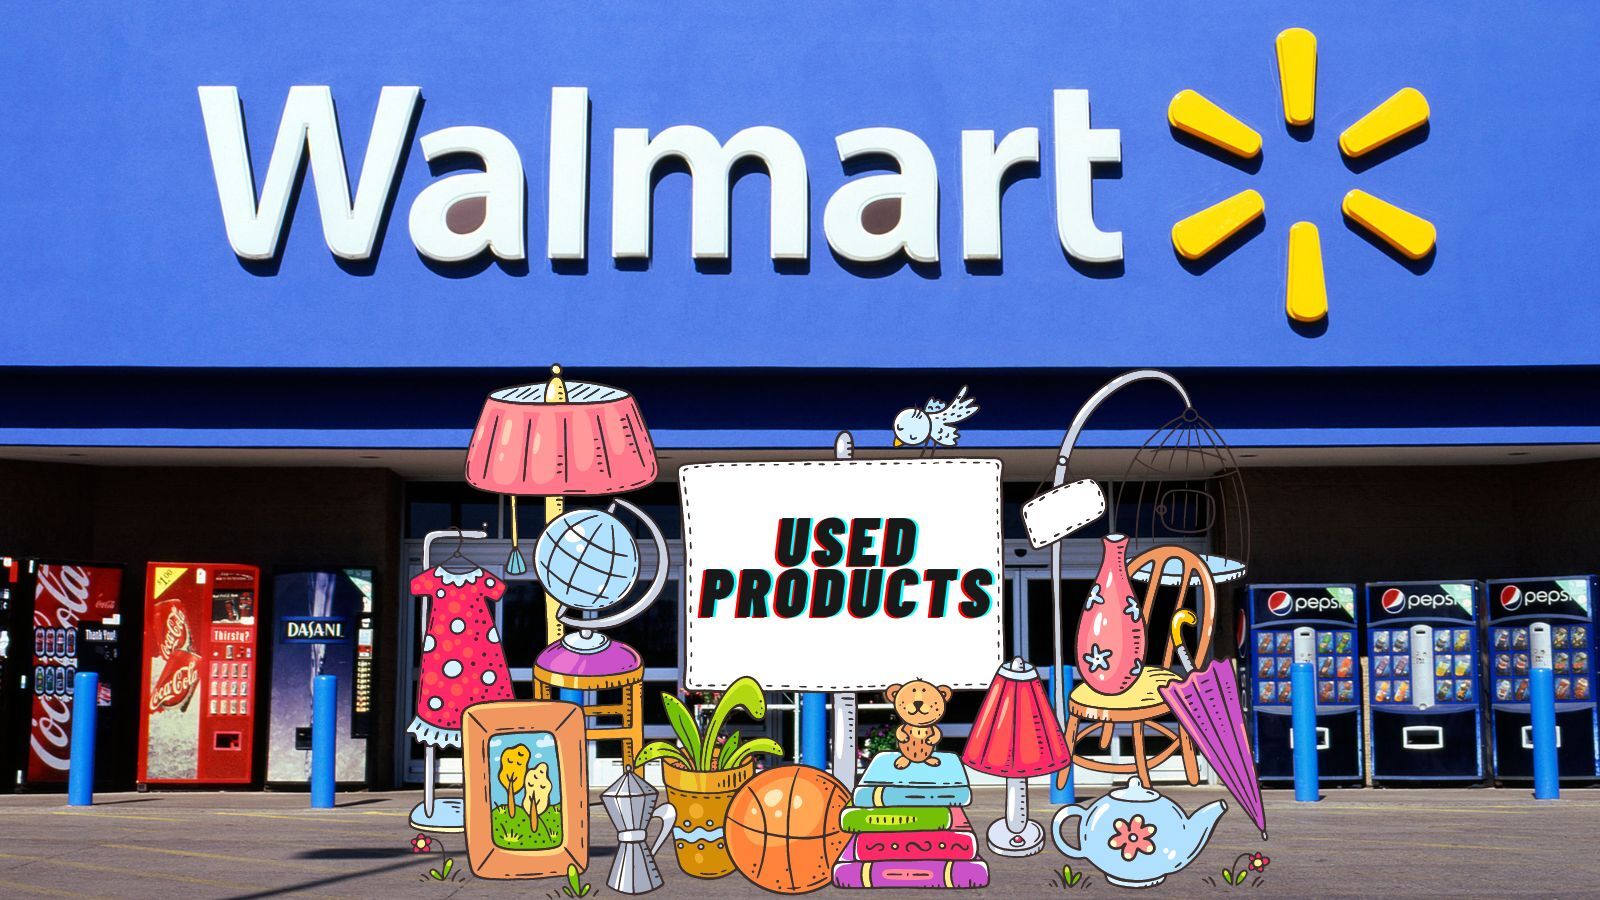 Does Walmart Sell Used Products? (Yes, Here Is What You Need to Know)